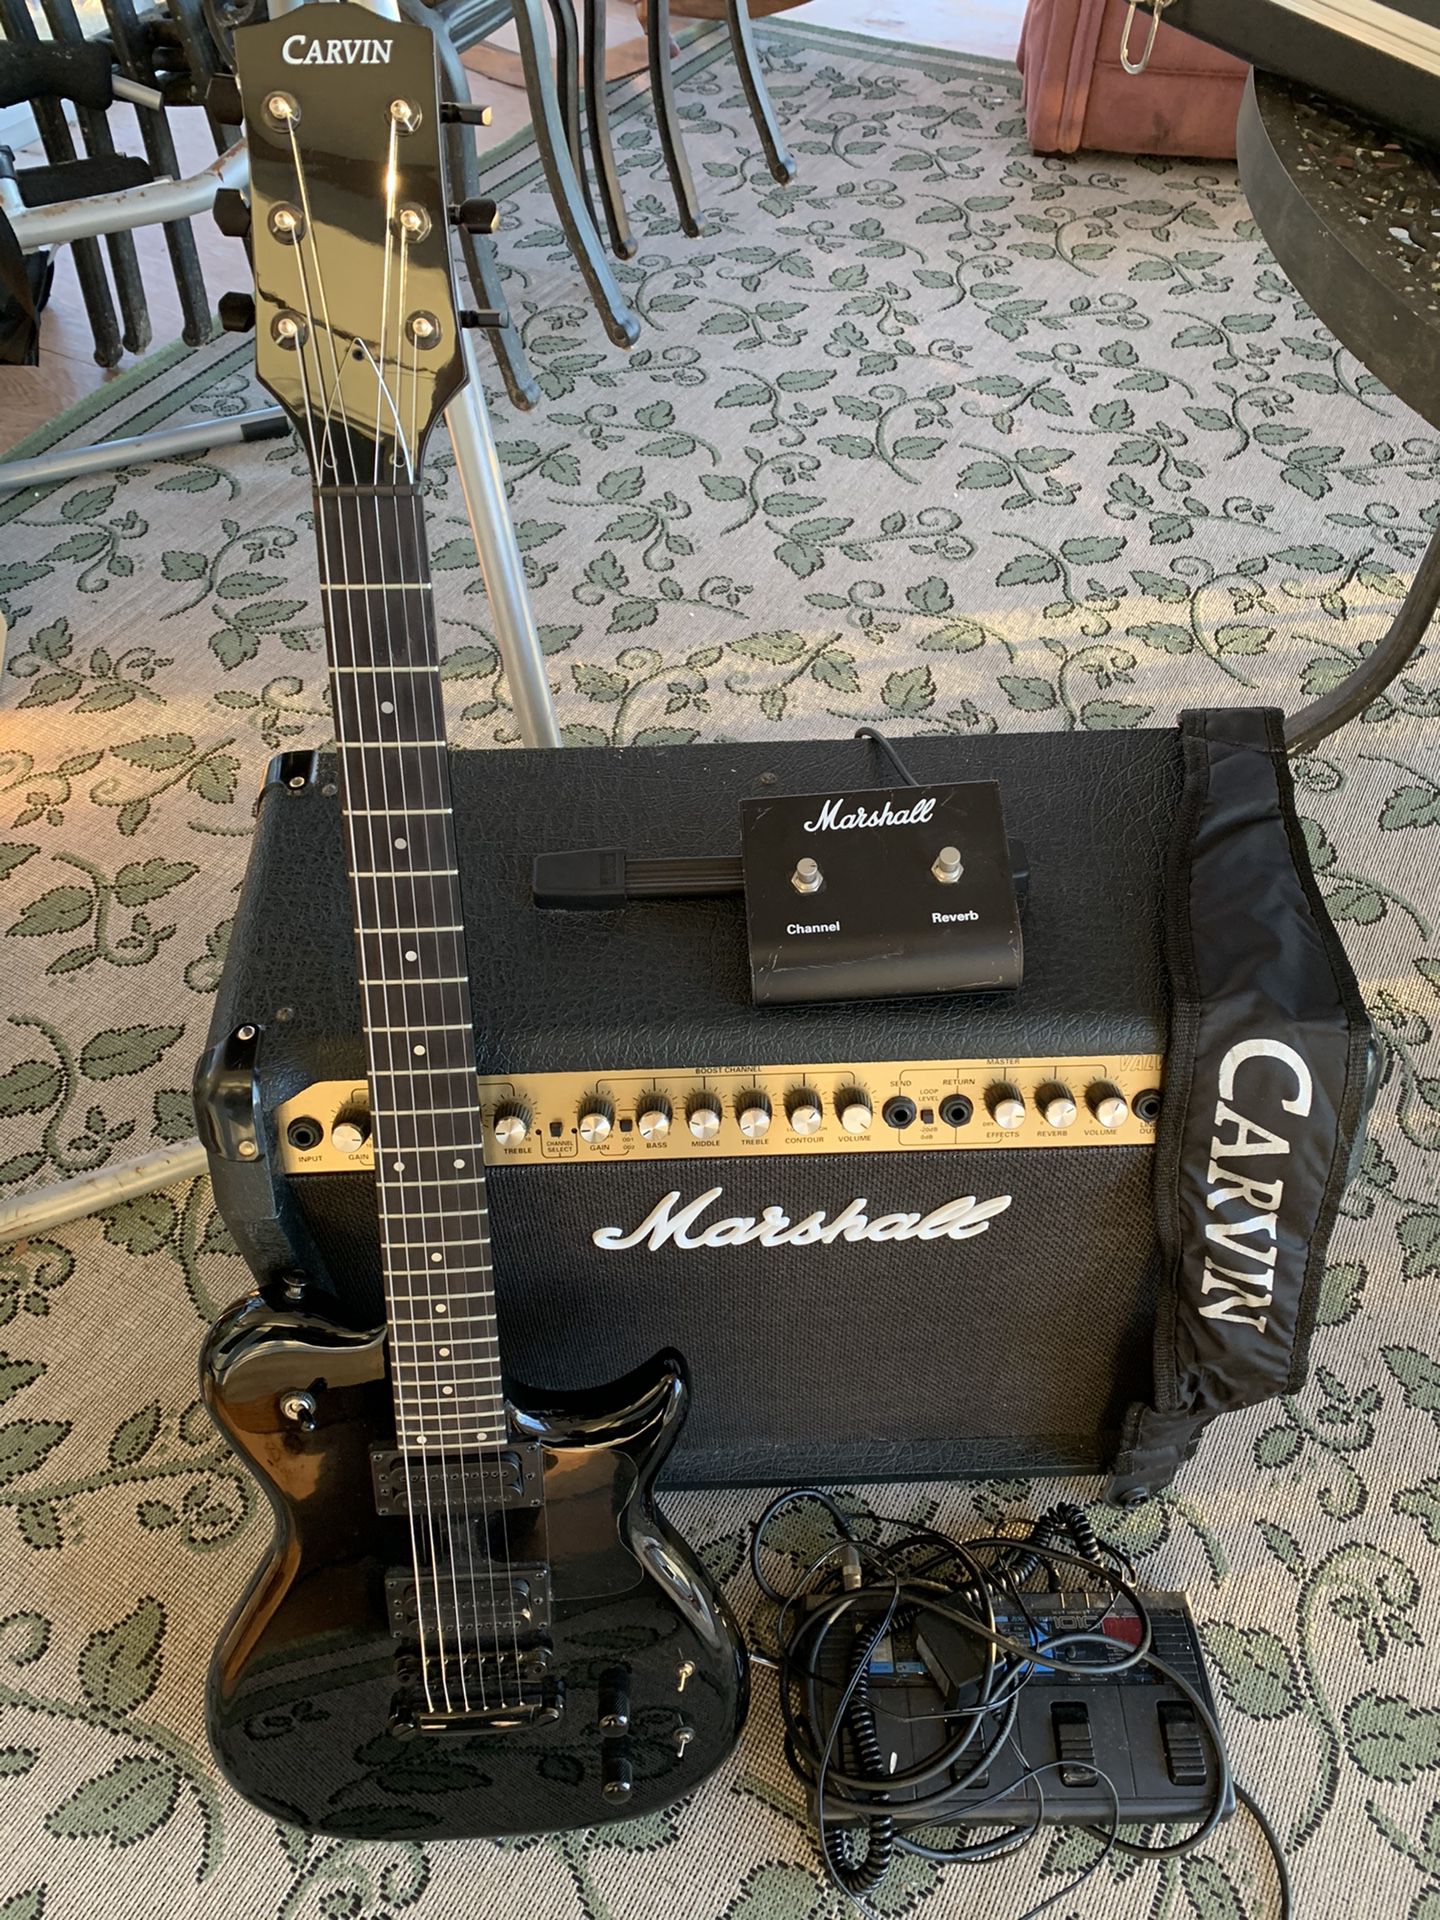 Carvin electric guitar and Marshall amp